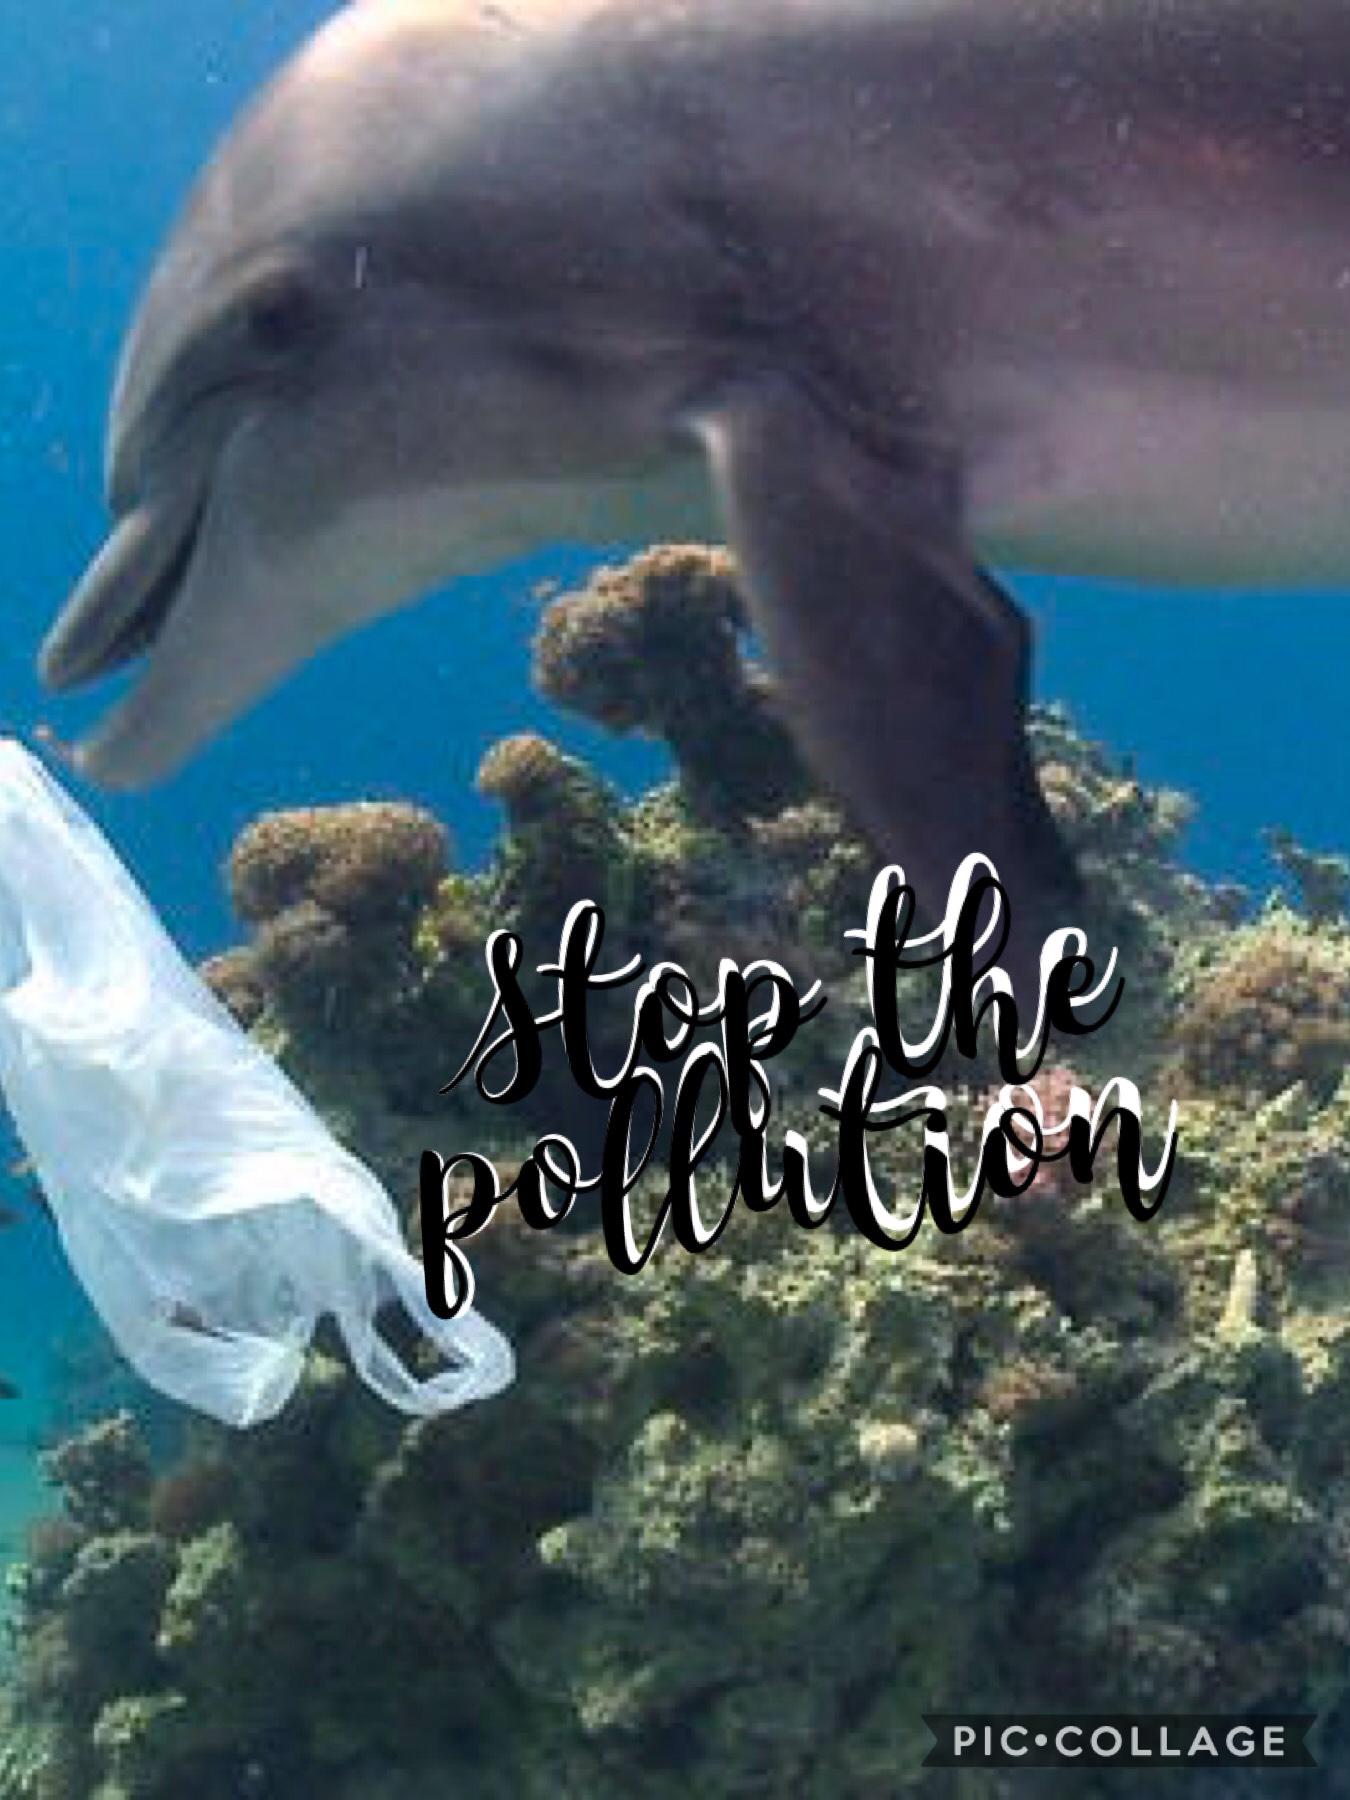 Quotes " Stop the pollution "